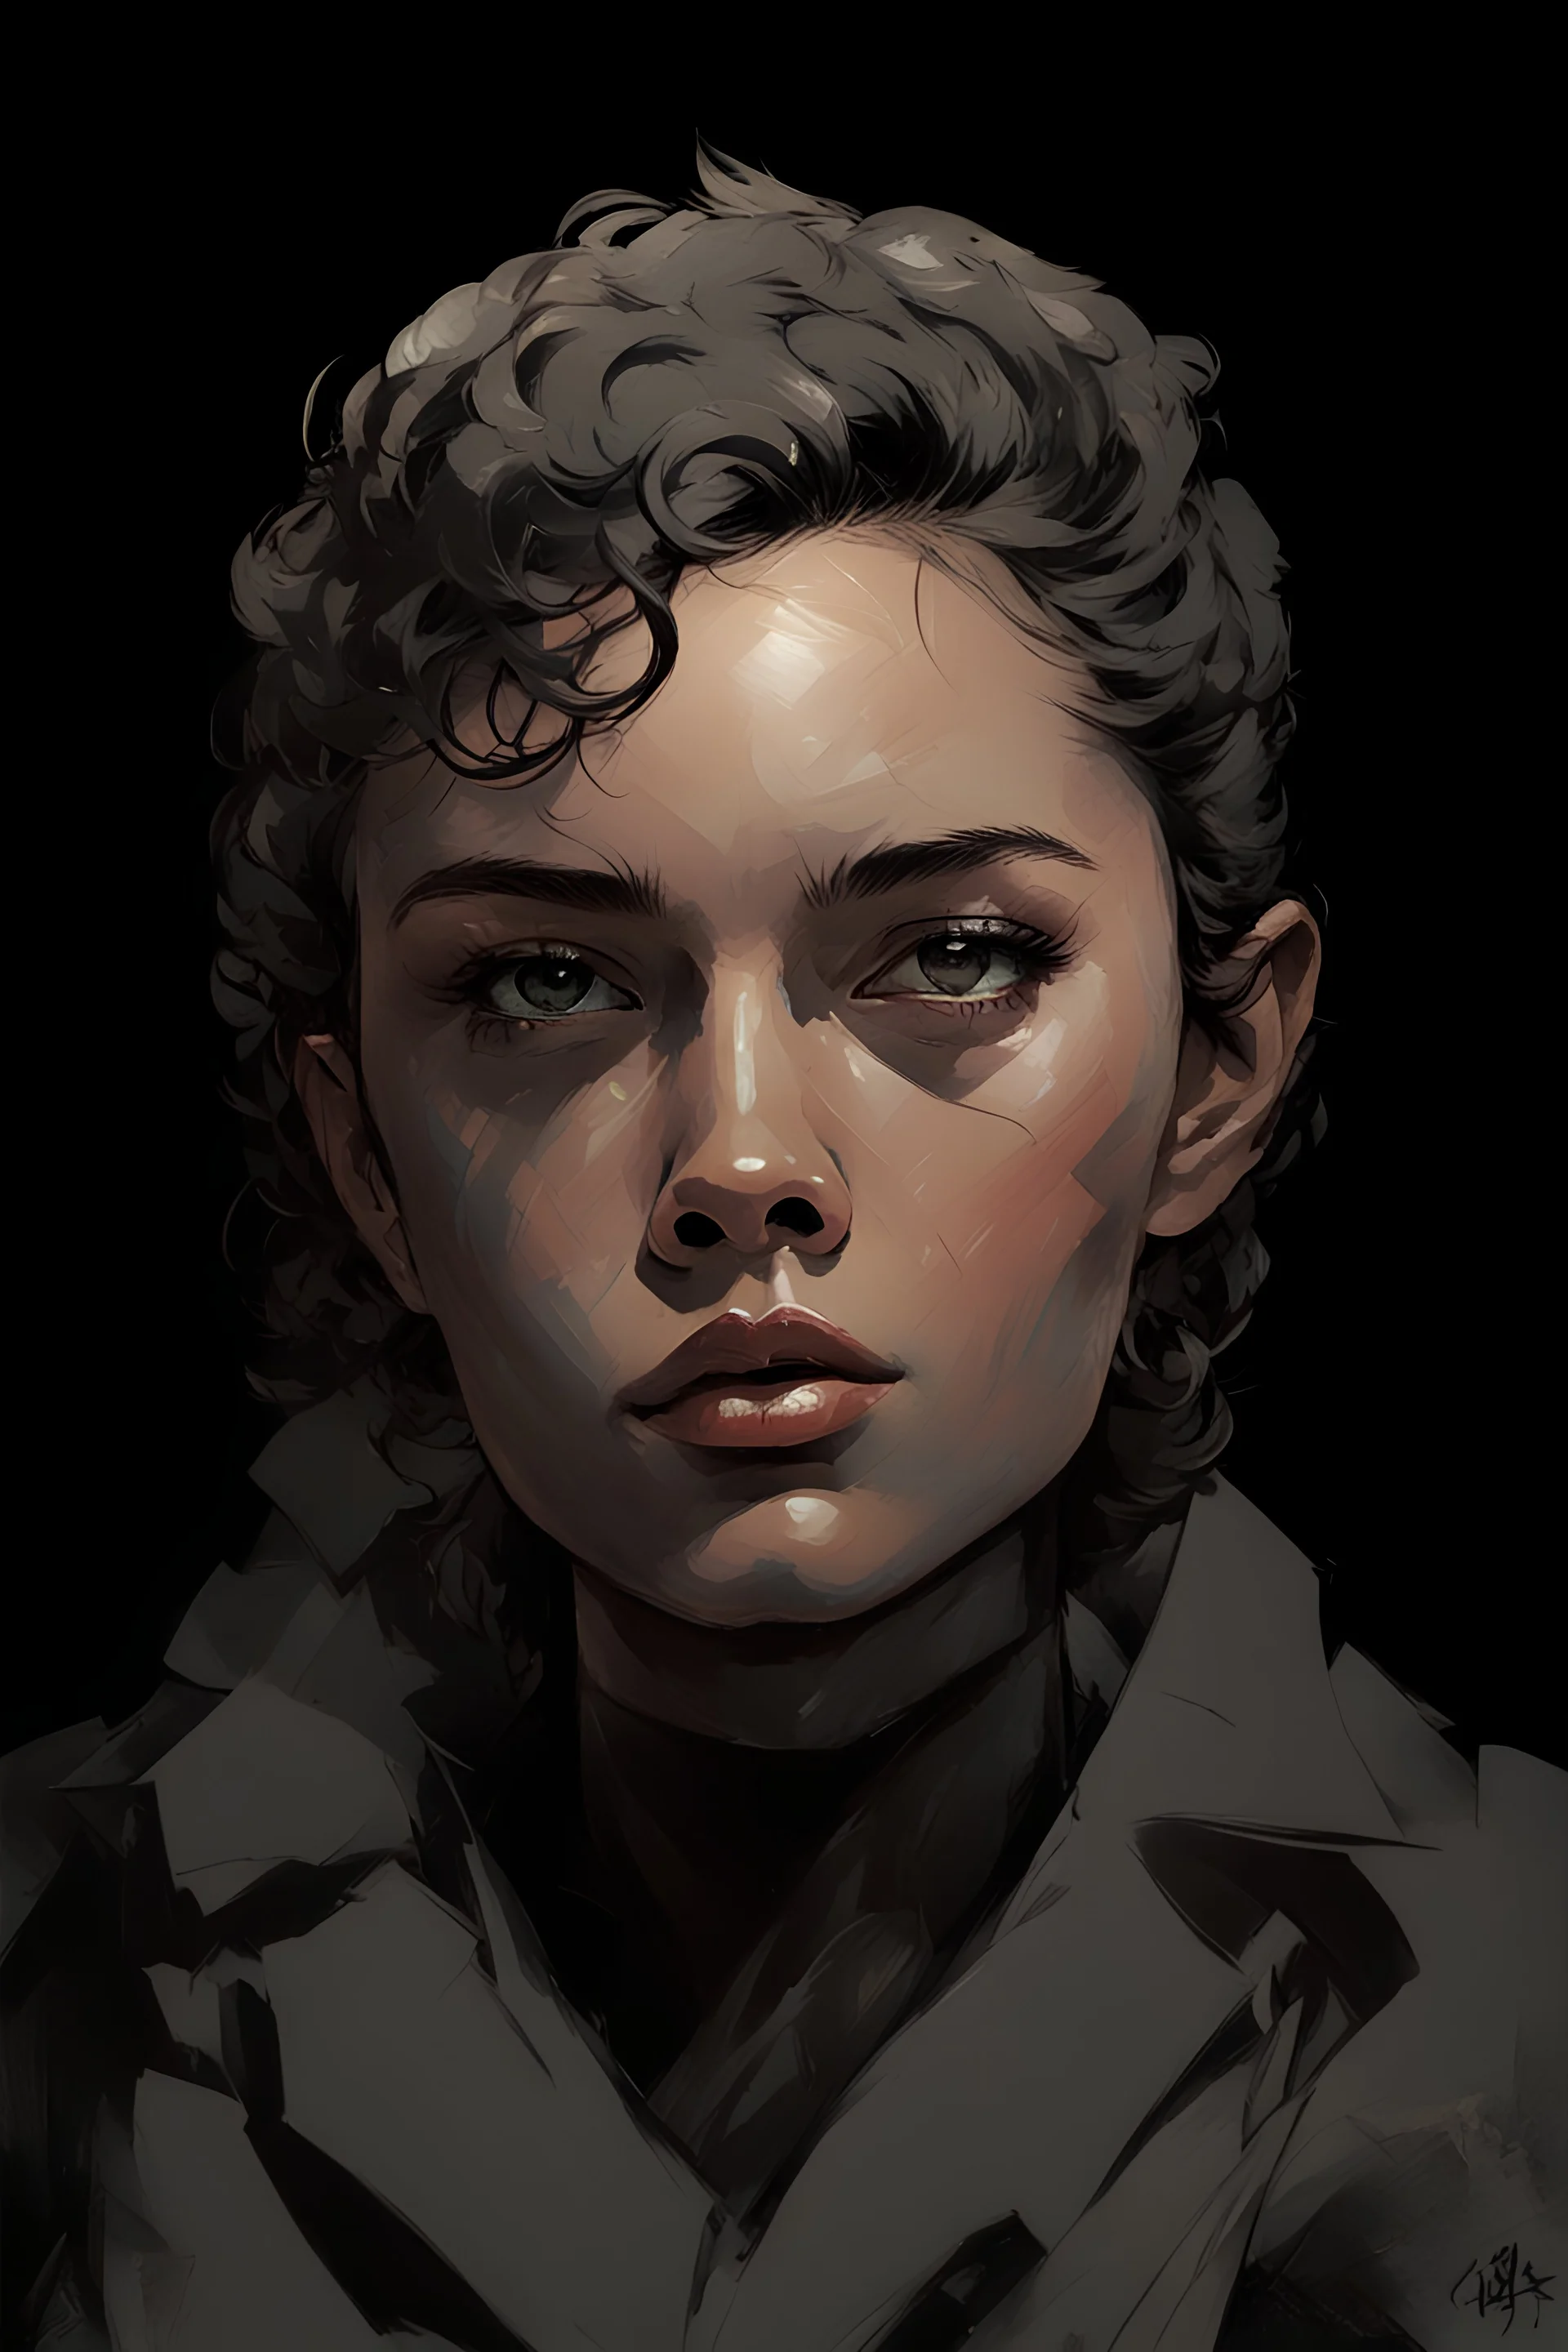 Portrait of a young woman with short black wavy hair. Include a short black horn on her forehead, and make it distinctive. include gray eyes, with a dark tanned skin complexion. Draw the portrait in the style of Yoji Shinkawa.